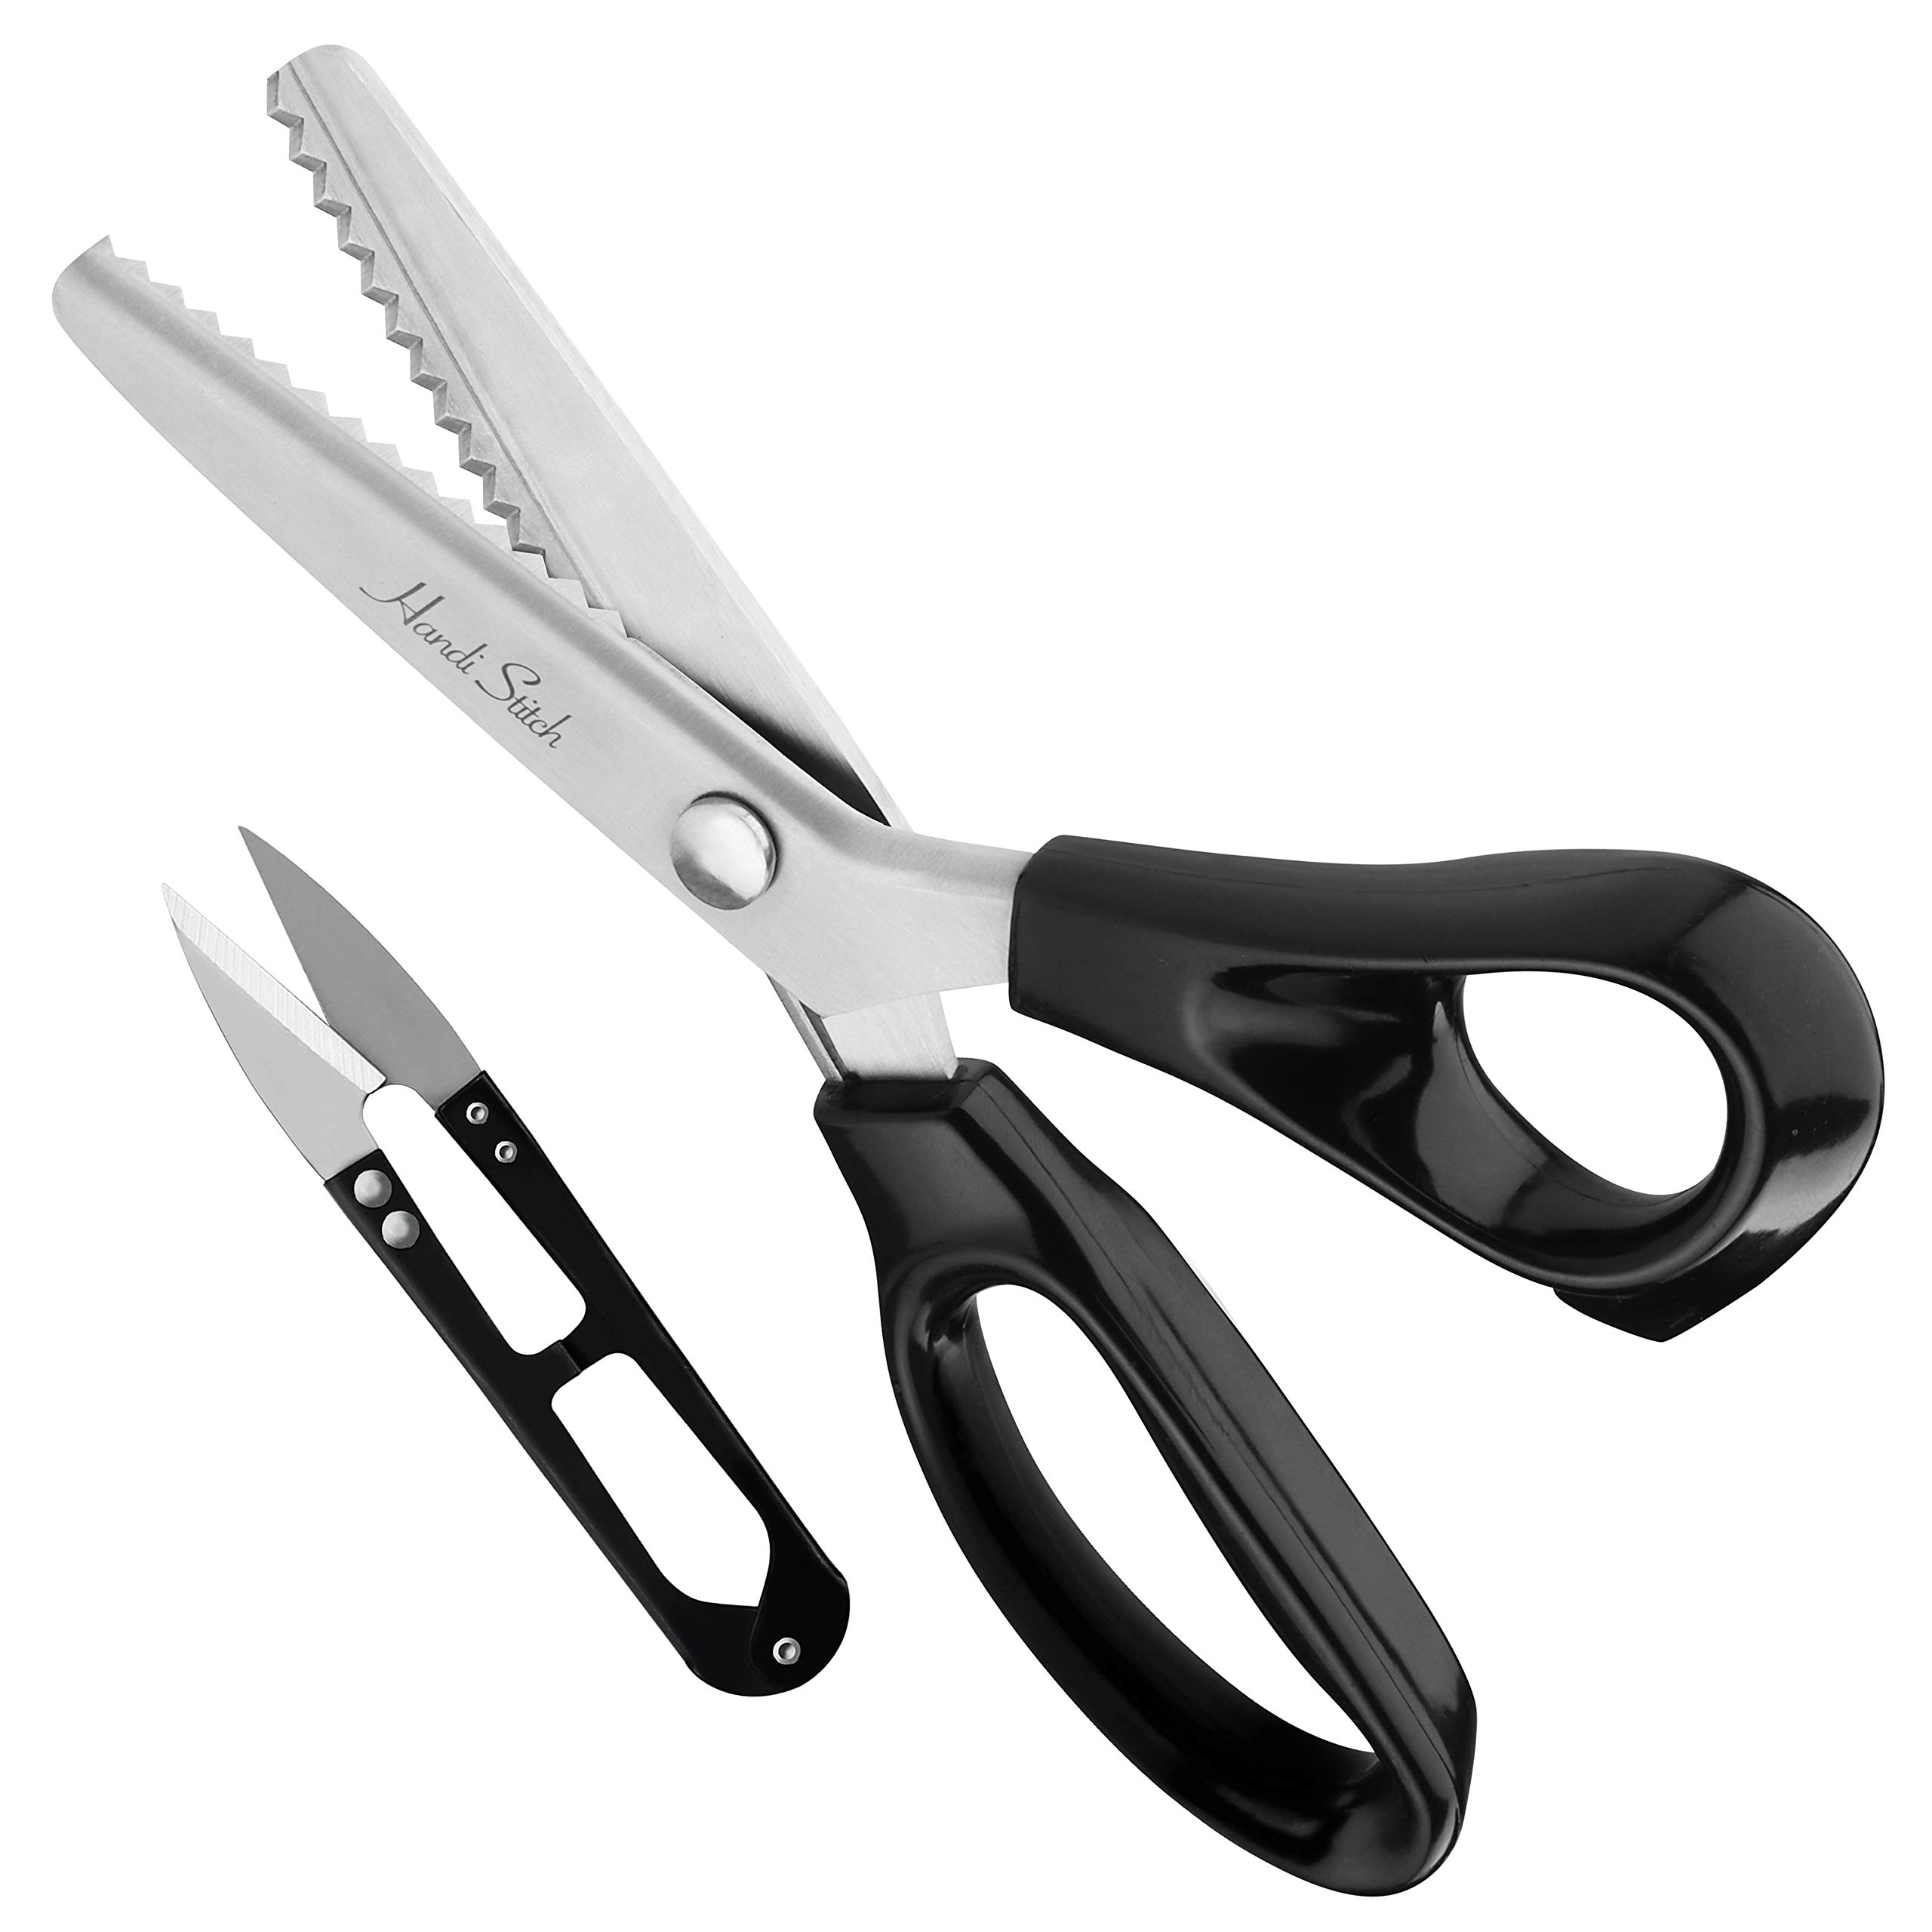 Stainless Steel Pinking Shears Sewing Scissor Fabric Leather Craft